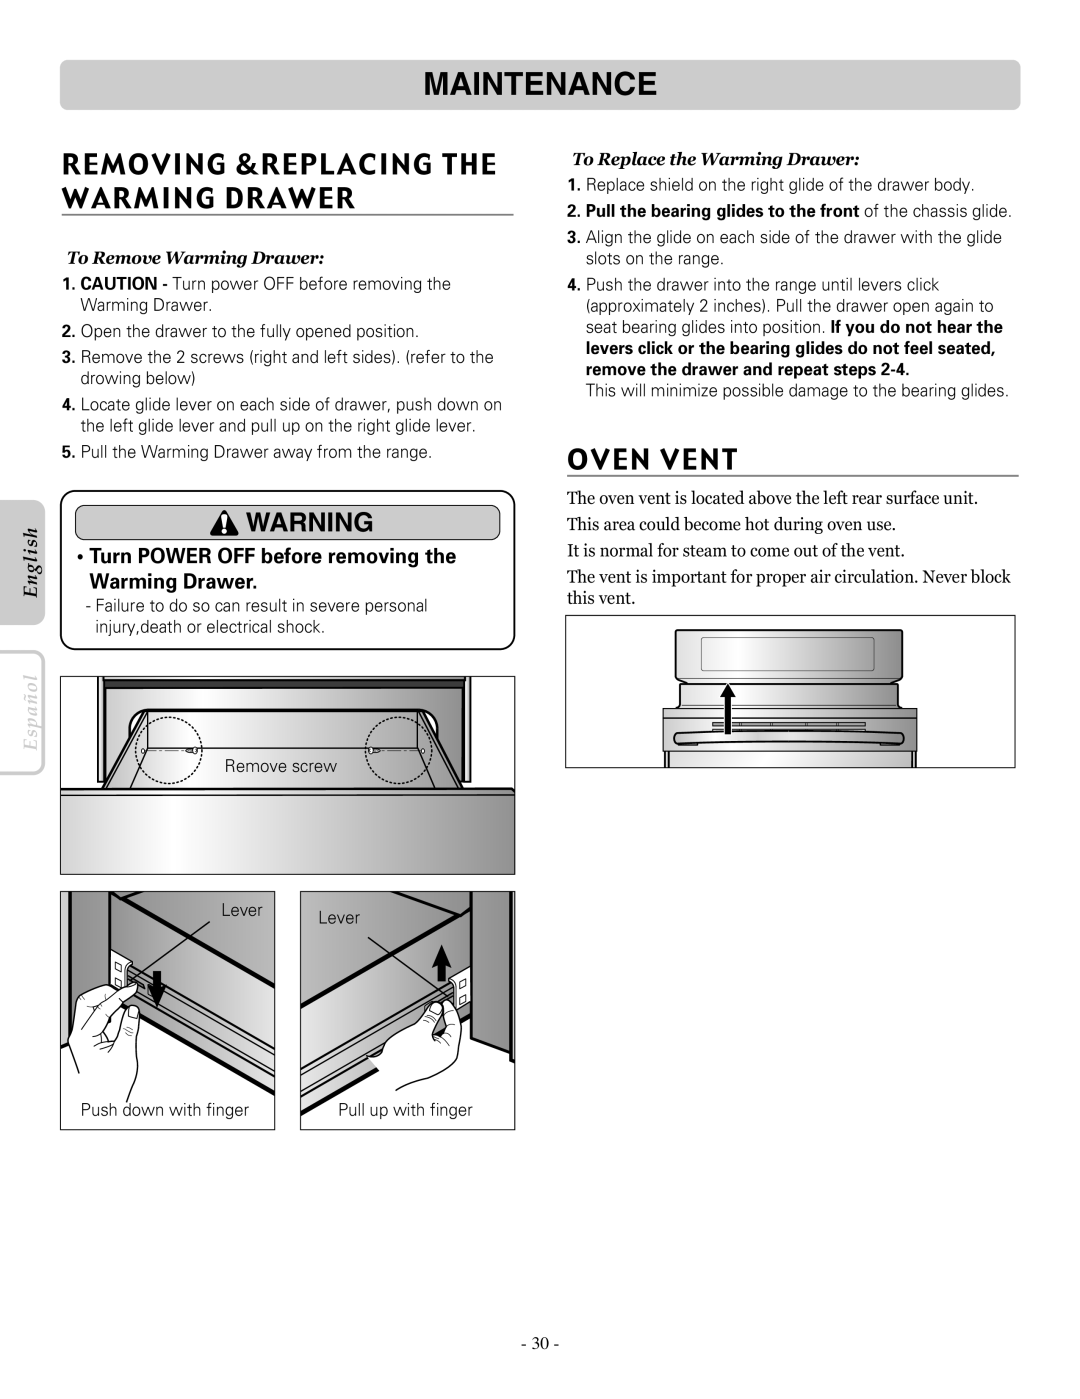 LG Electronics LRE30757SW Maintenance, Removing &Replacing The Warming Drawer, Oven Vent, To Remove Warming Drawer 